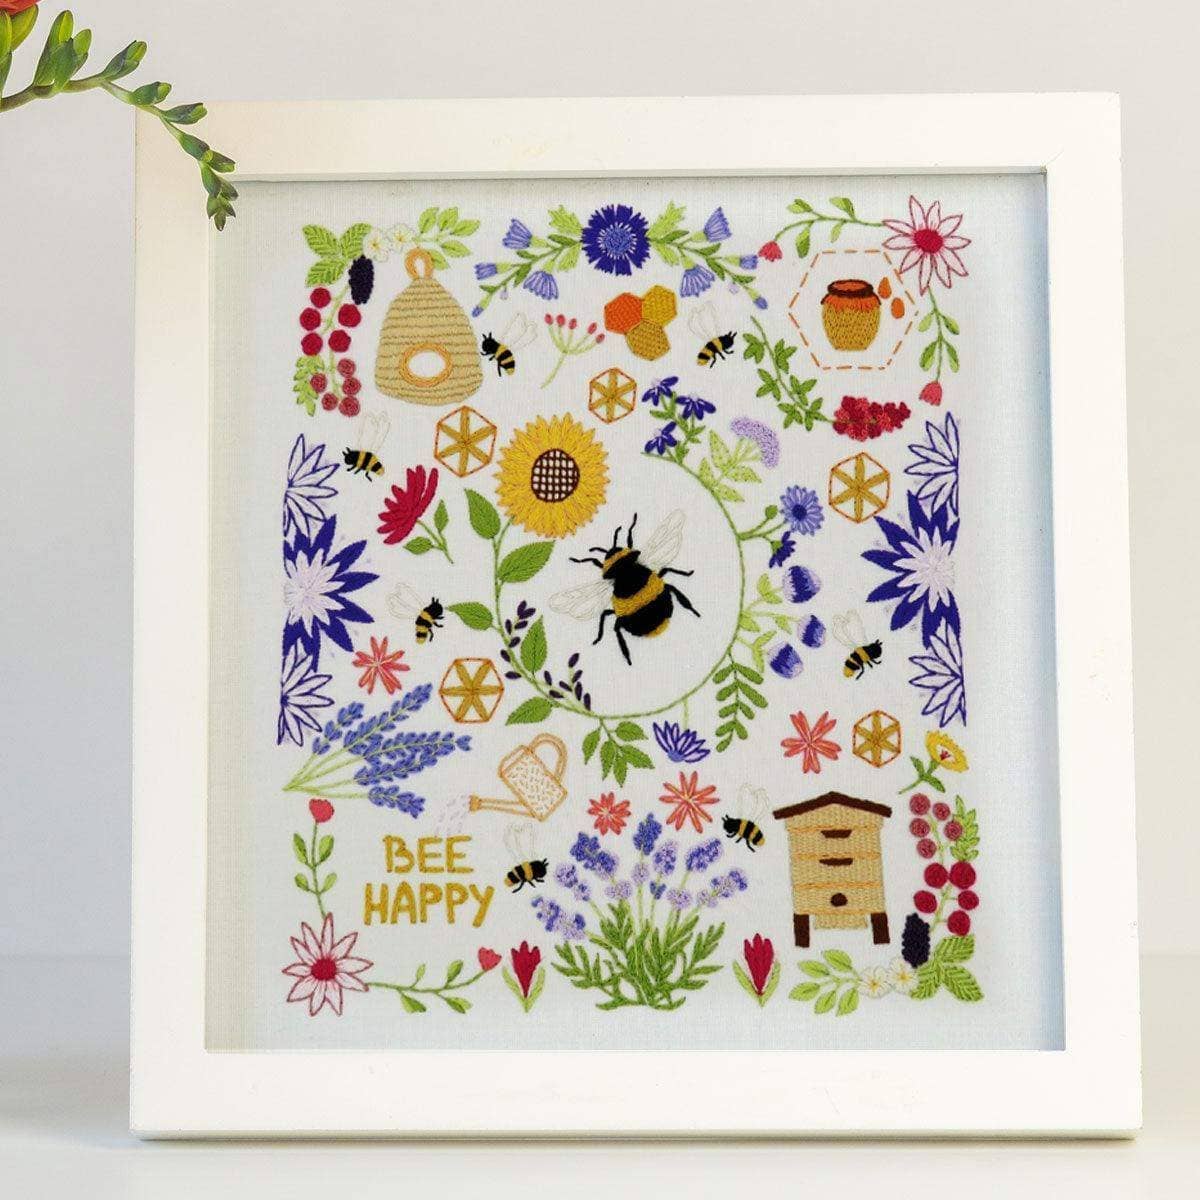 Bees and Blossoms Pre Printed Fabric Panel , Pre Printed Fabric Pattern , StitchDoodles , bird embroidery, Embroidery, embroidery hoop, embroidery hoop kit, Embroidery Kit, embroidery kit for adults, embroidery kit fro beginners, embroidery pattern, hand embroidery, hand embroidery fabric, hand embroidery kit, hand embroidery seat frame, modern embroidery kits, nurge embroidery hoop, PDF pattern, Printed Pattern, wildlife embroidery , StitchDoodles , shop.stitchdoodles.com